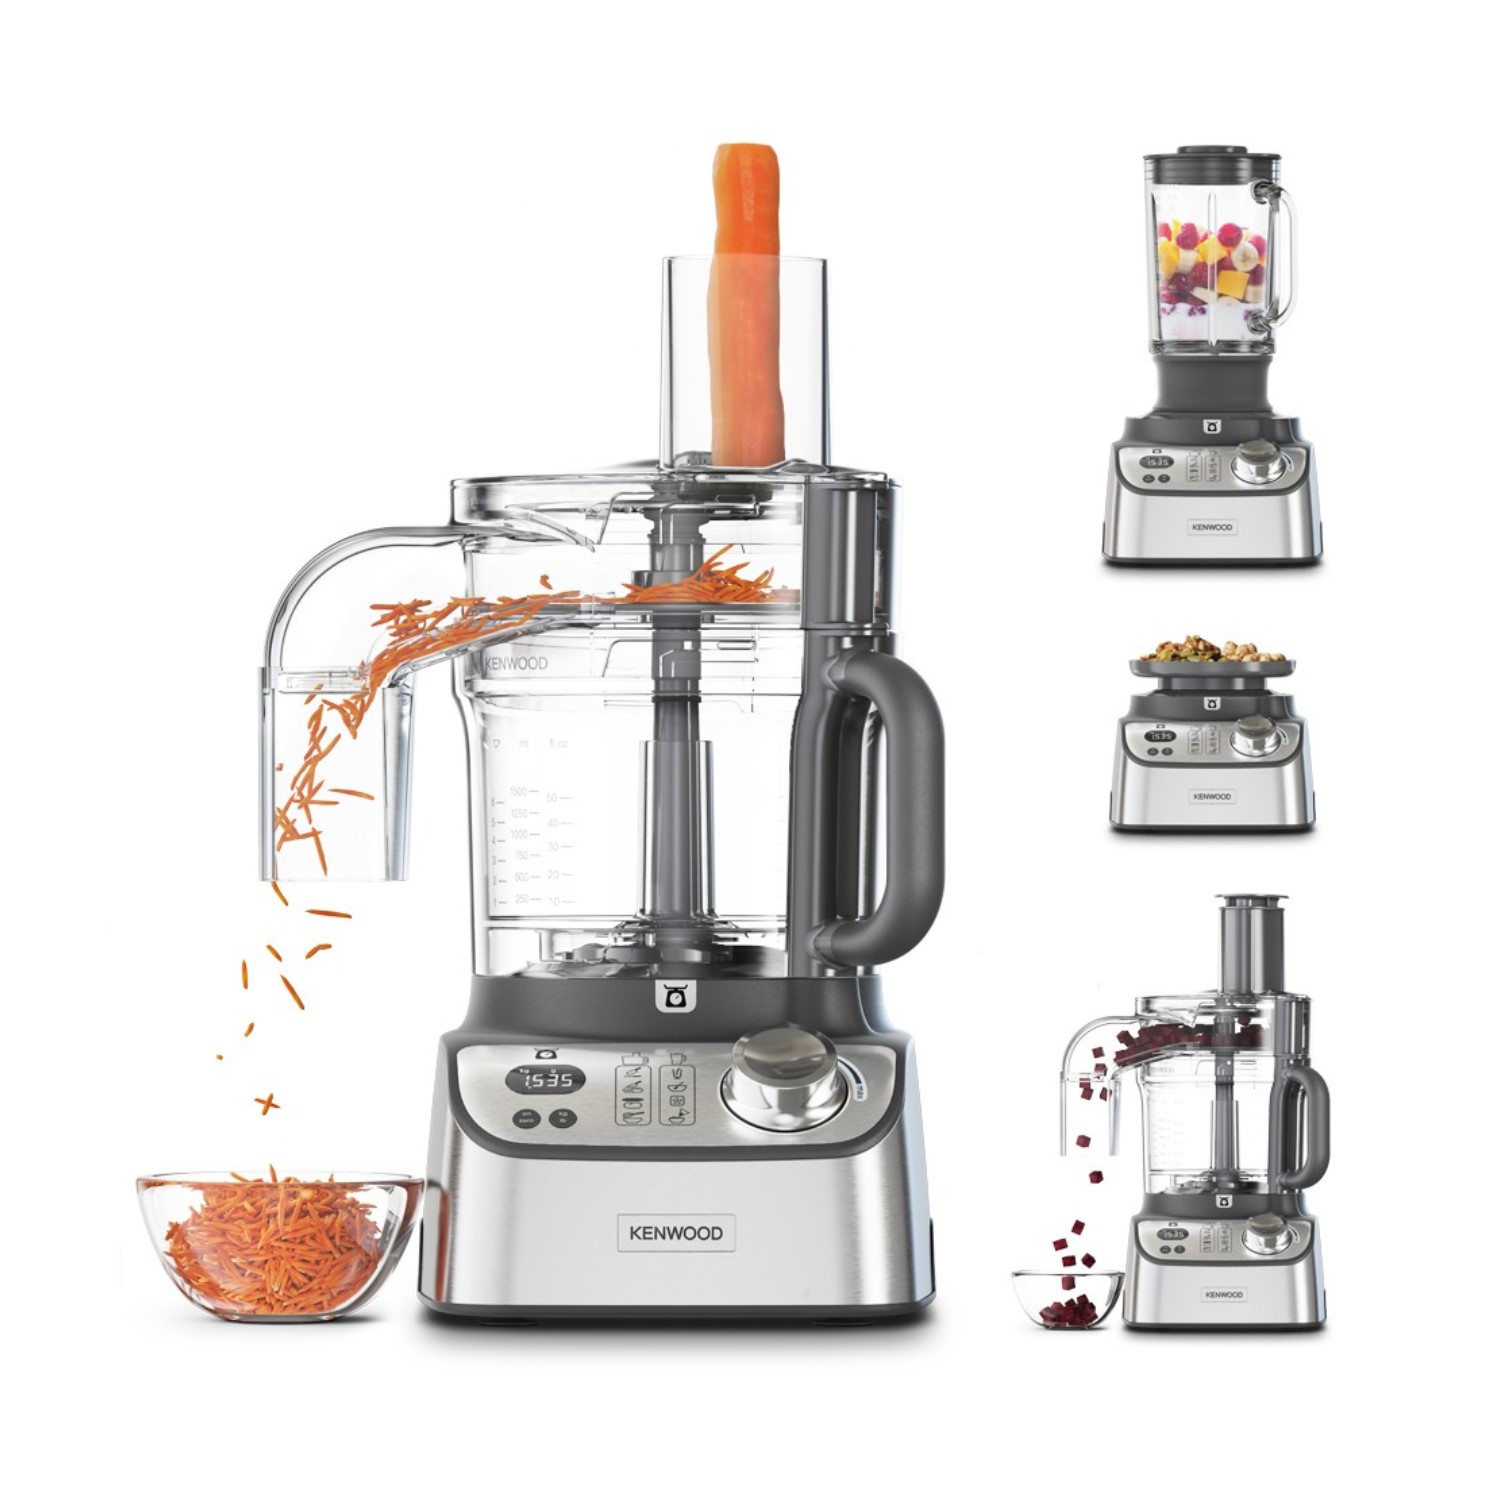 Mediate bladre Antarktis Kenwood Multipro Express Weigh+ 7-in-1 Food Processor with Blender and  Built-In Scales - Silver FDM71.960SS | Appliances Direct